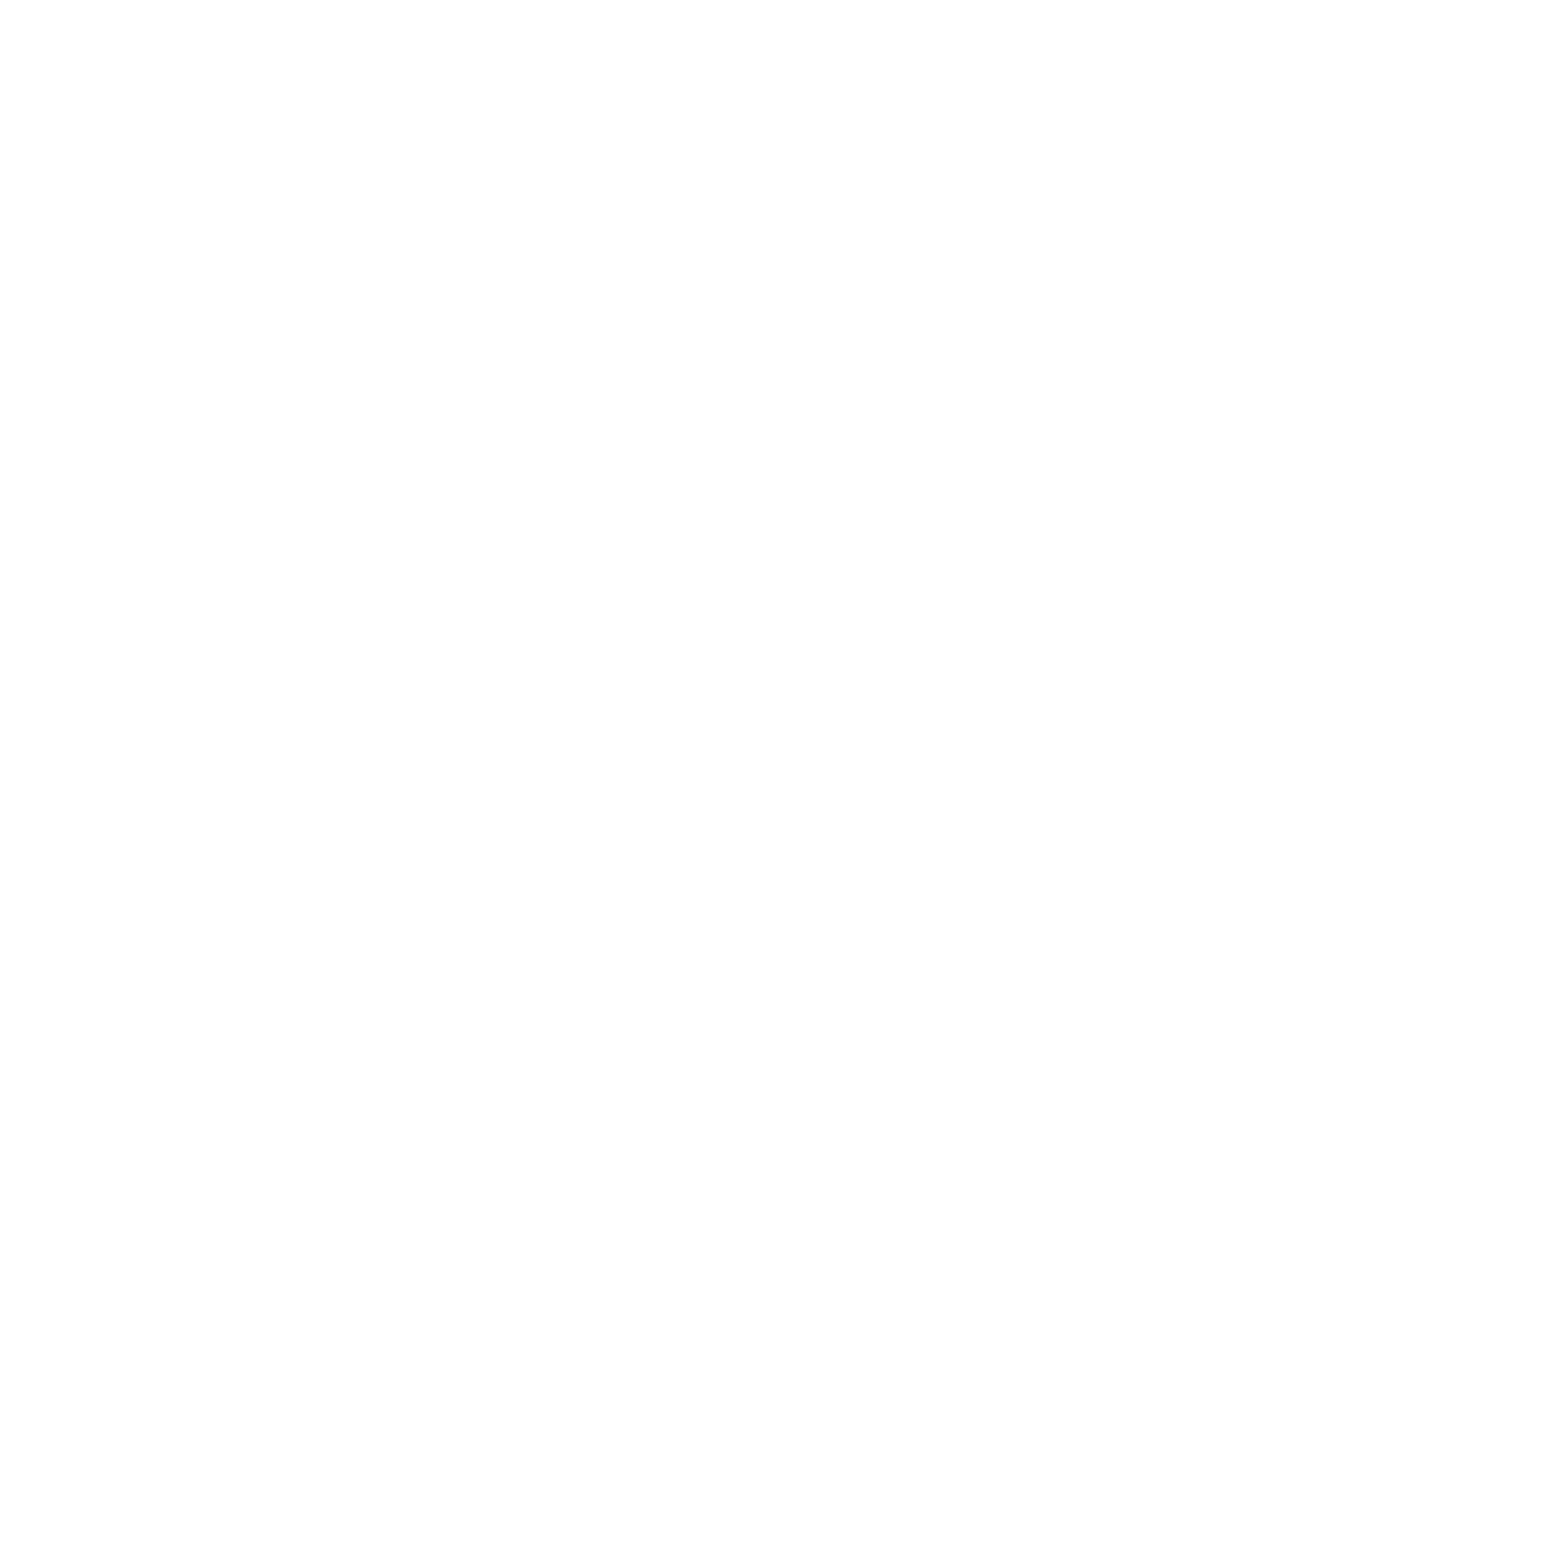 Asia Cement logo for dark backgrounds (transparent PNG)